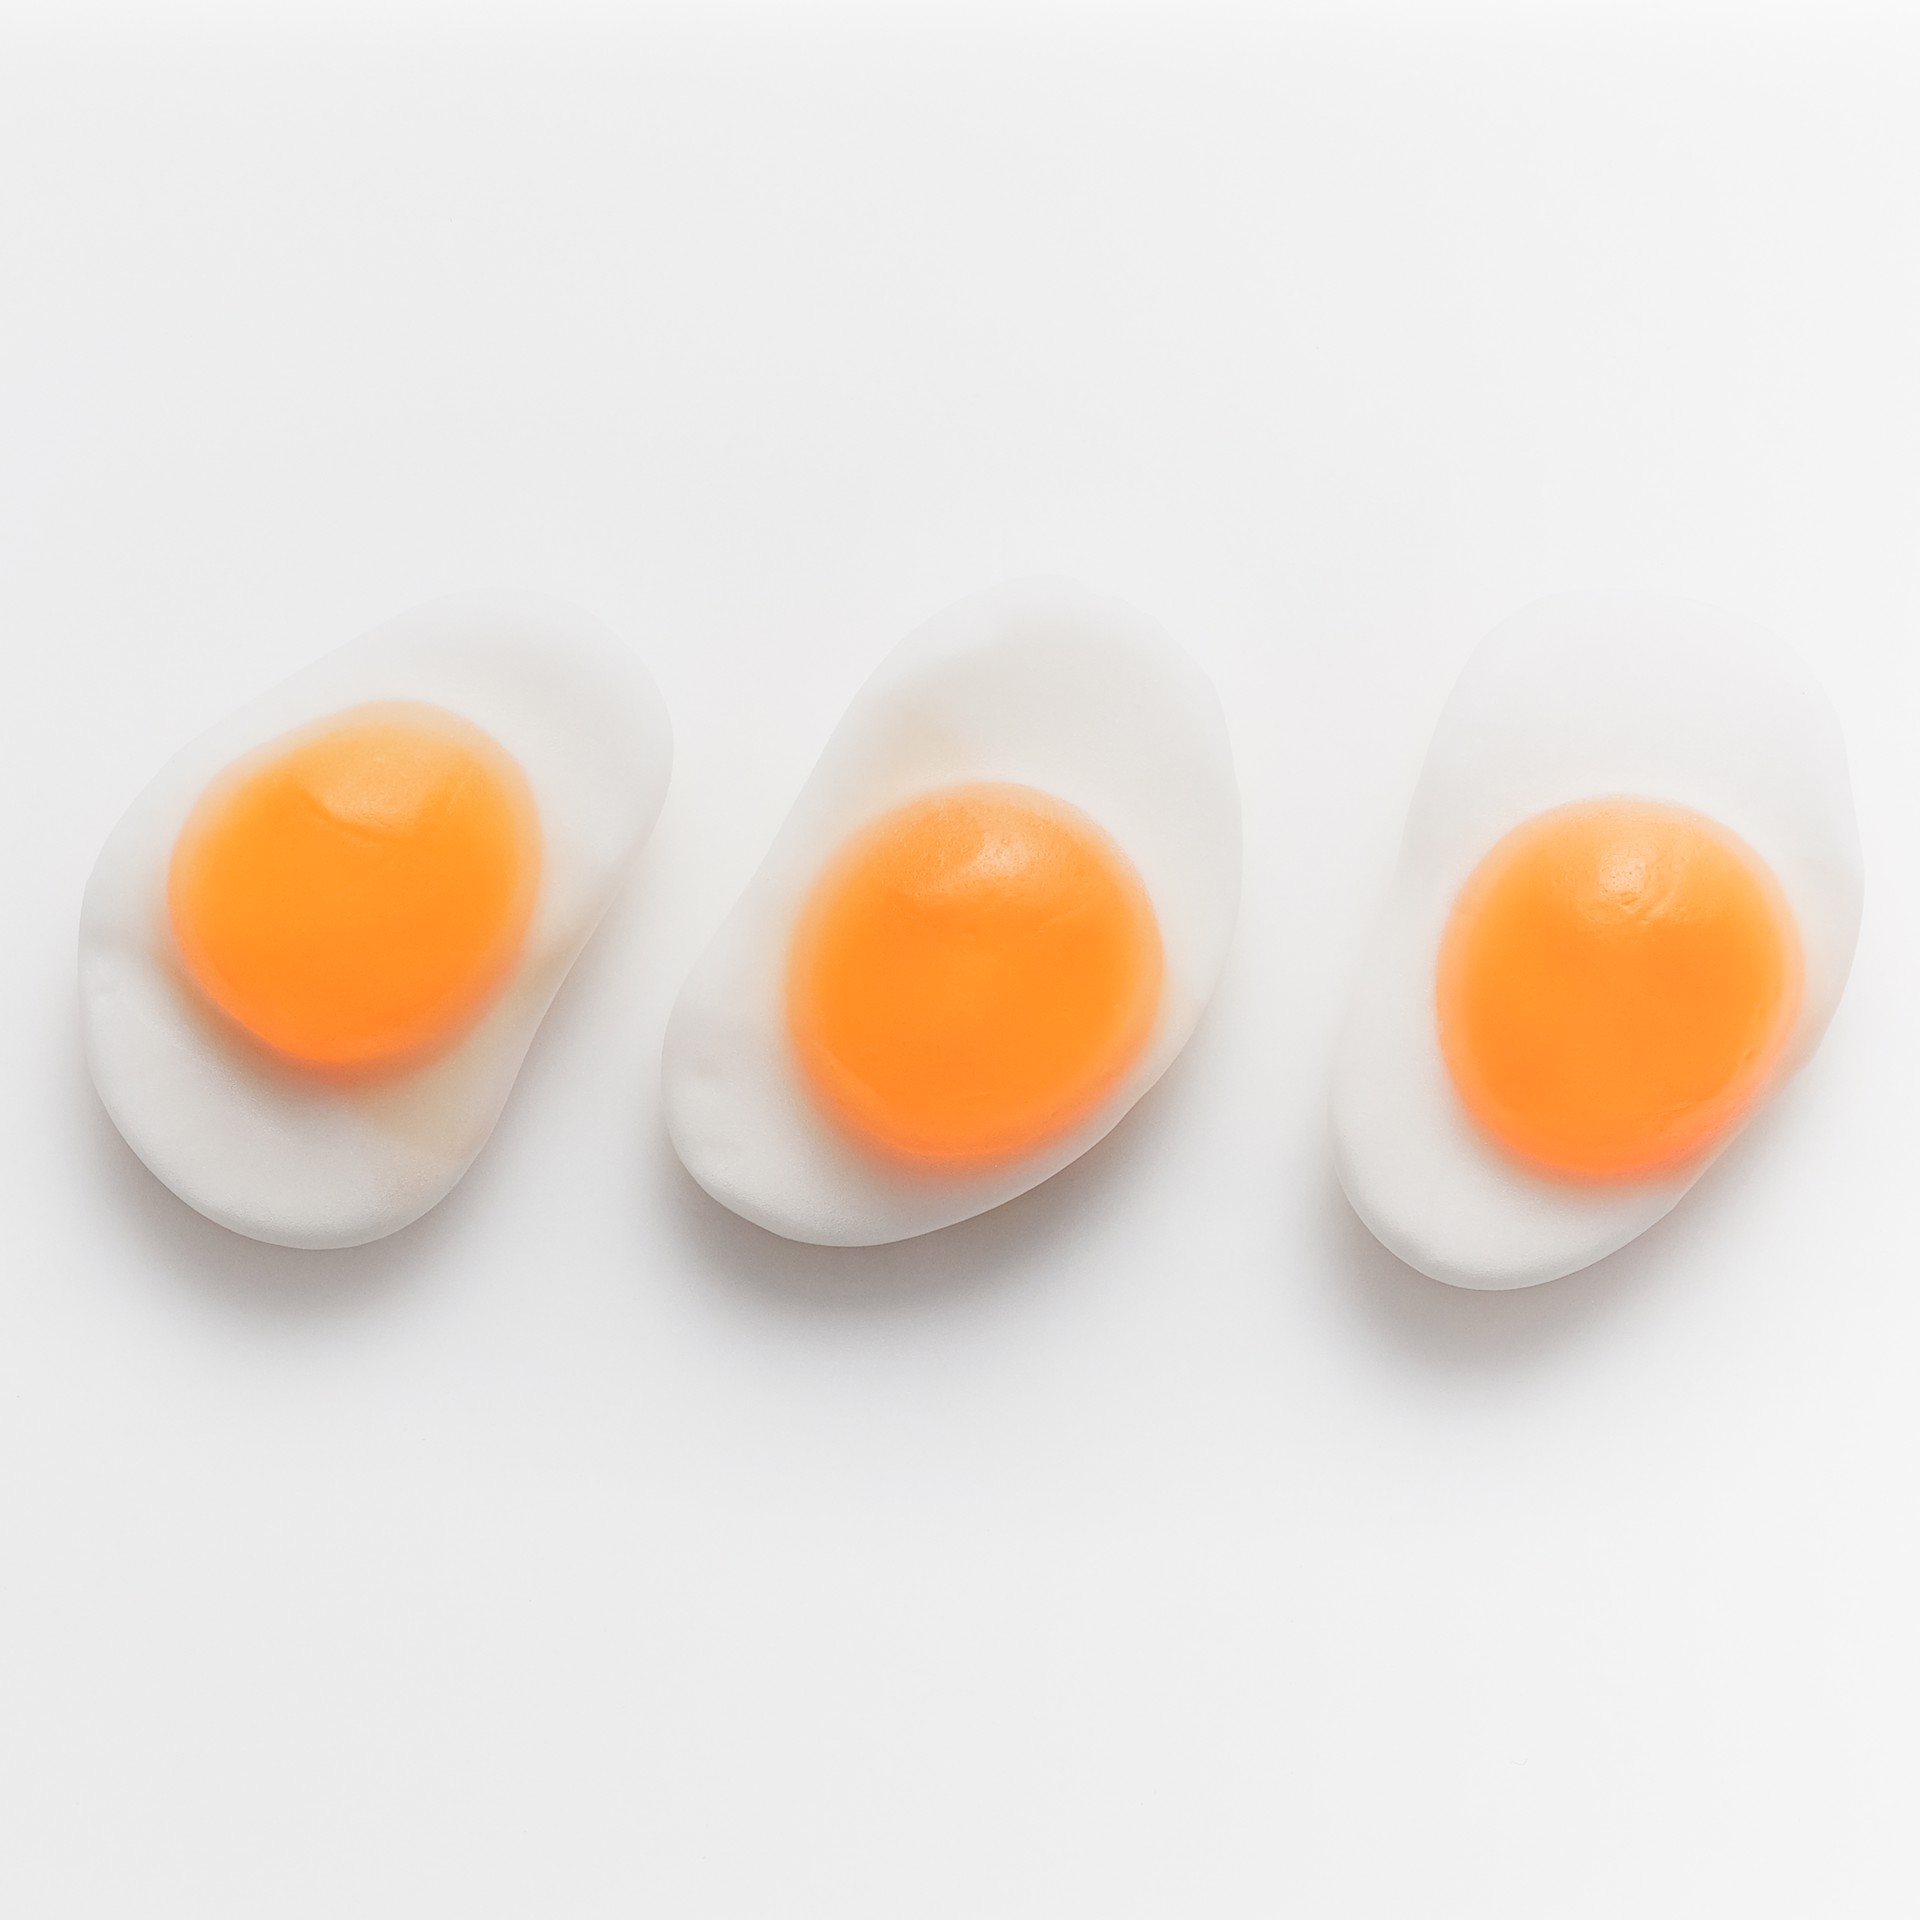 Gummy Fried Eggs by Peter Andrew Lusztyk / Refined Sugar